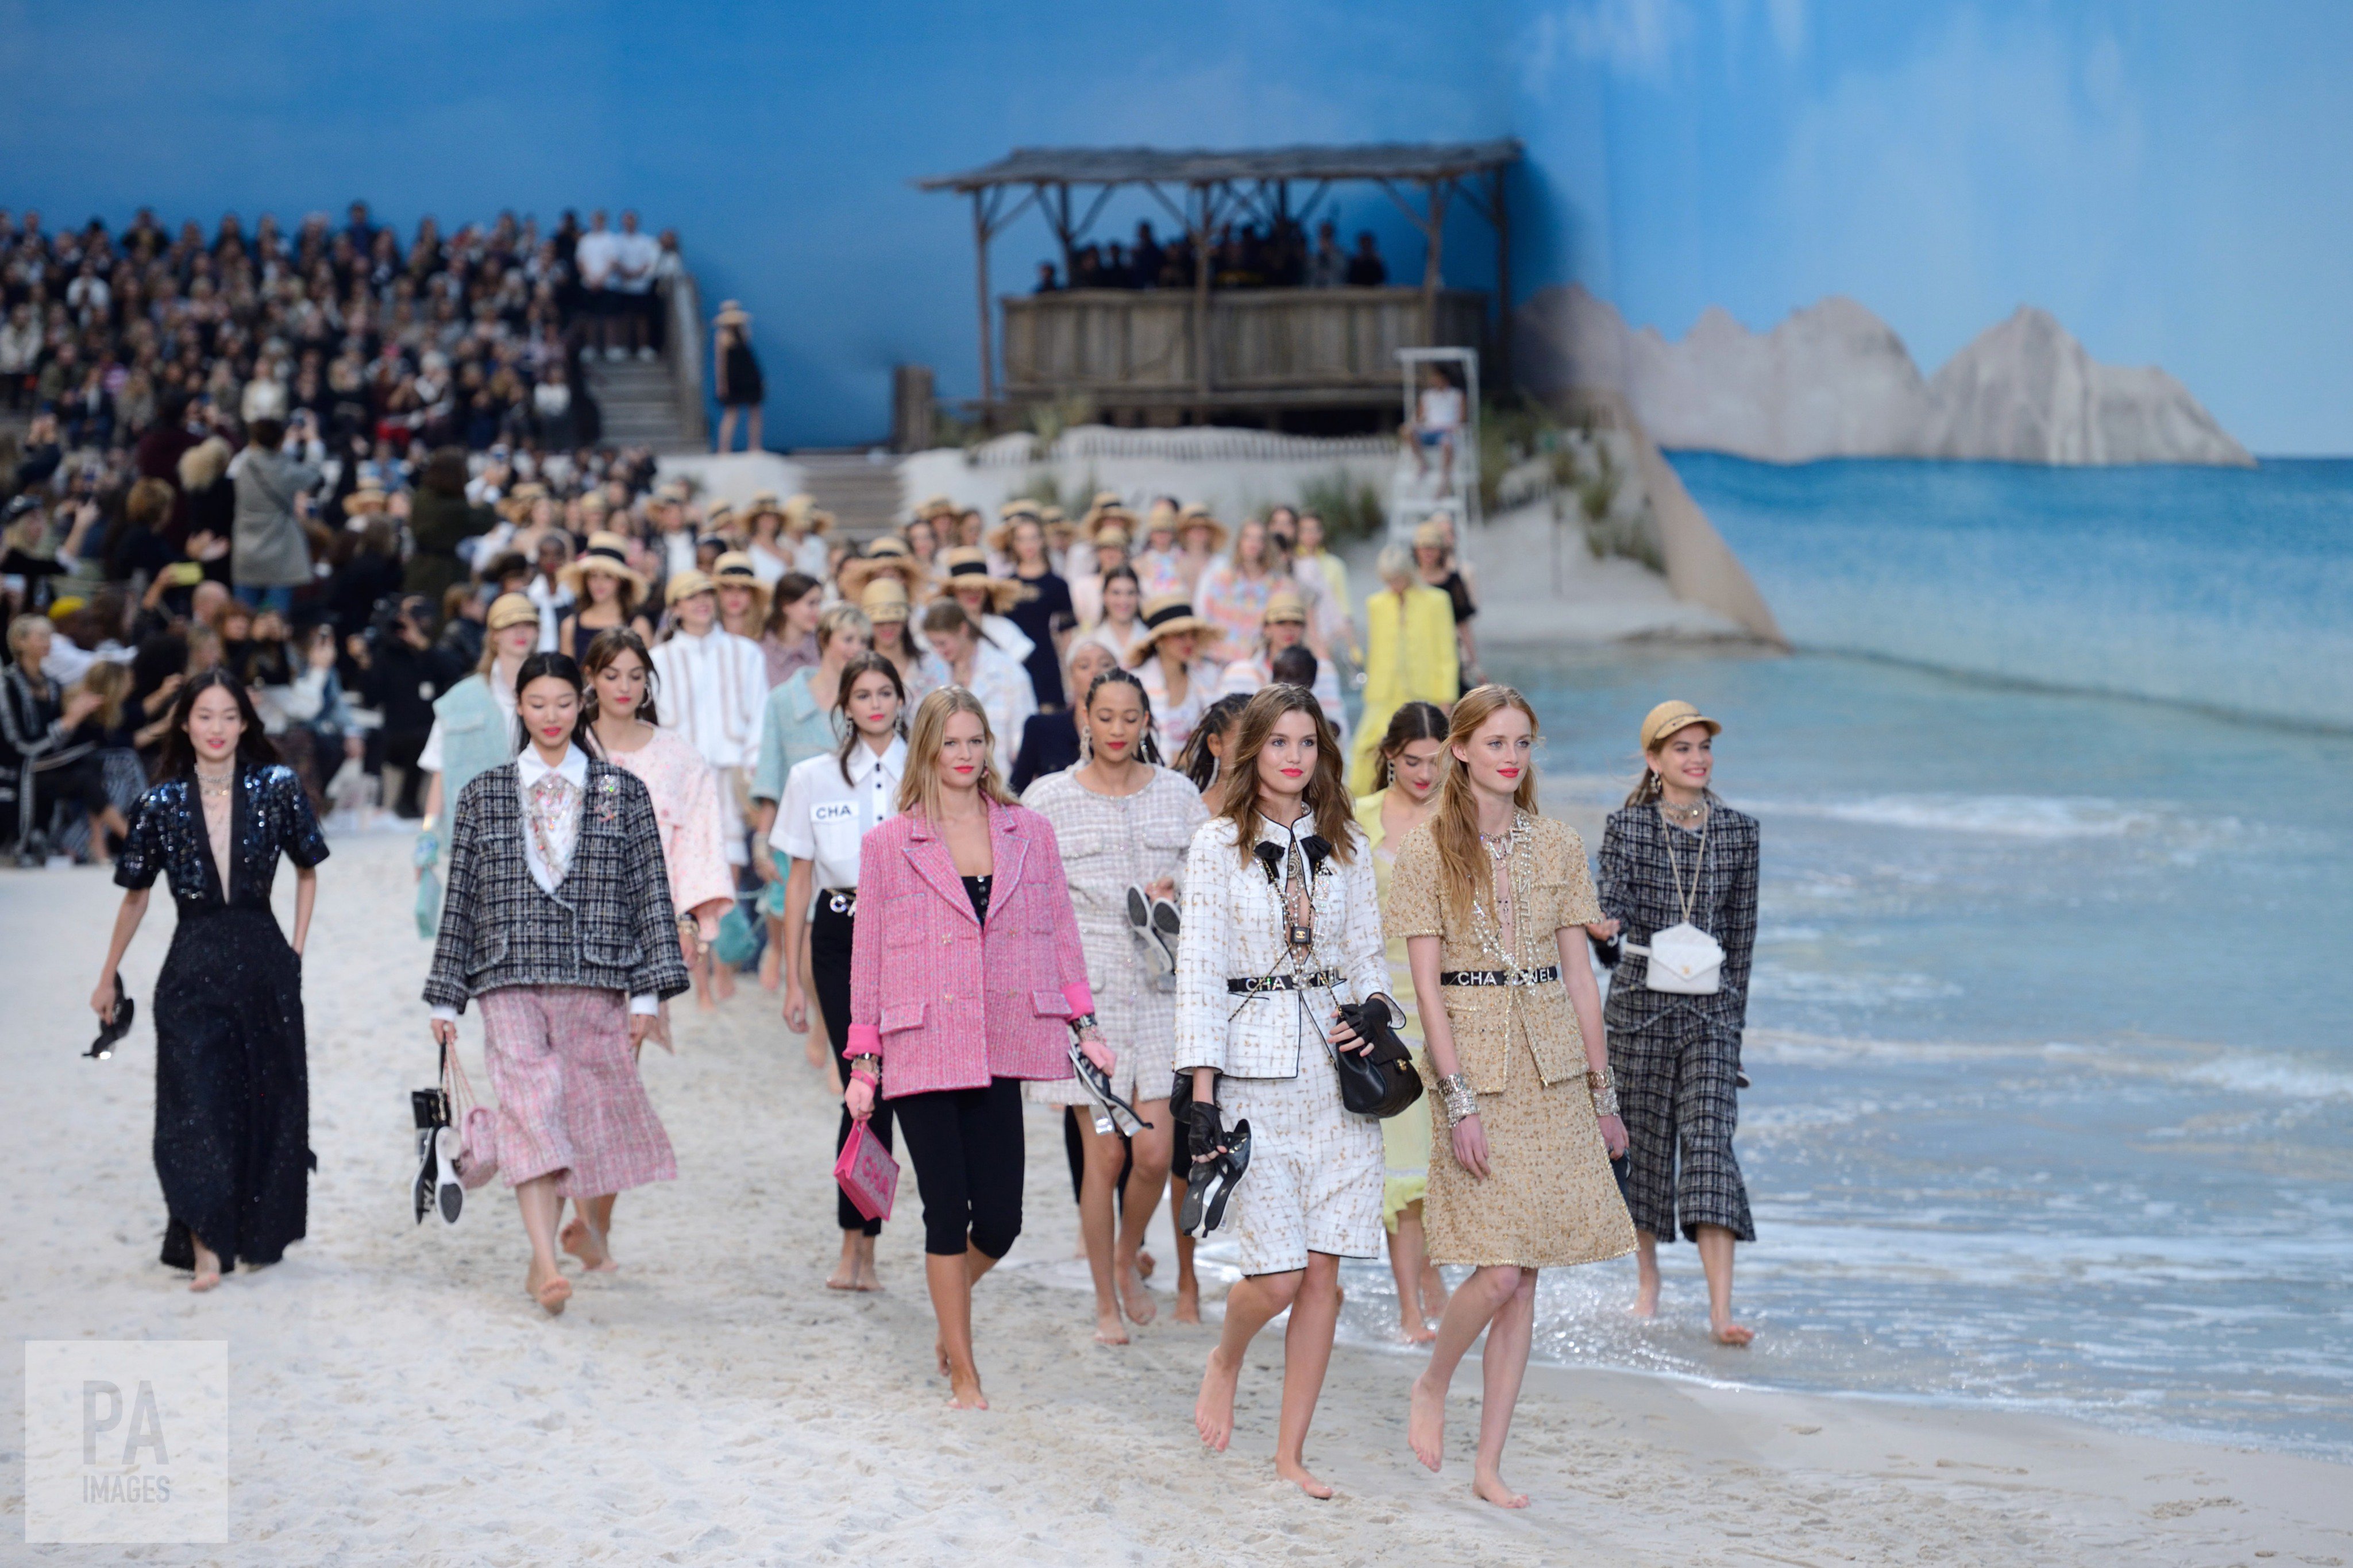 Alamy Editorial on Twitter: "Stunning location and beach set for catwalk show at the Grand Palais Champs-Elysees for Paris Fashion Week Abaca/PA Images See more at https://t.co/4OejjSjF0M #PFW #